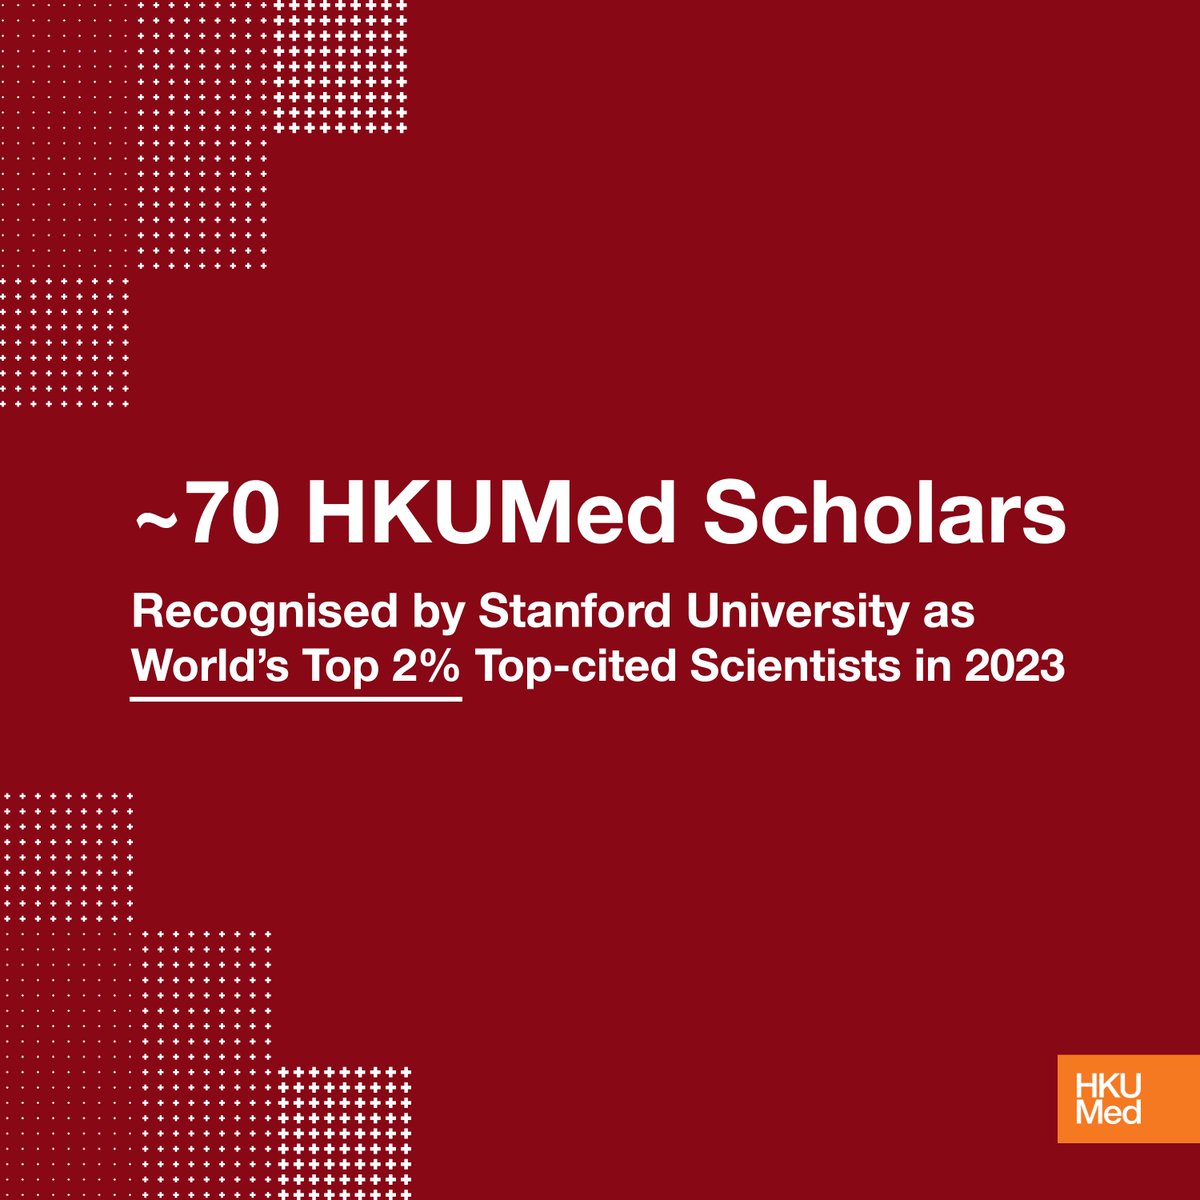 Congratulations to the almost 70 HKUMed scholars who ranked among the top 2% of scientists globally in the “Updated science-wide author databases of standardised citation indicators' produced by Stanford University.